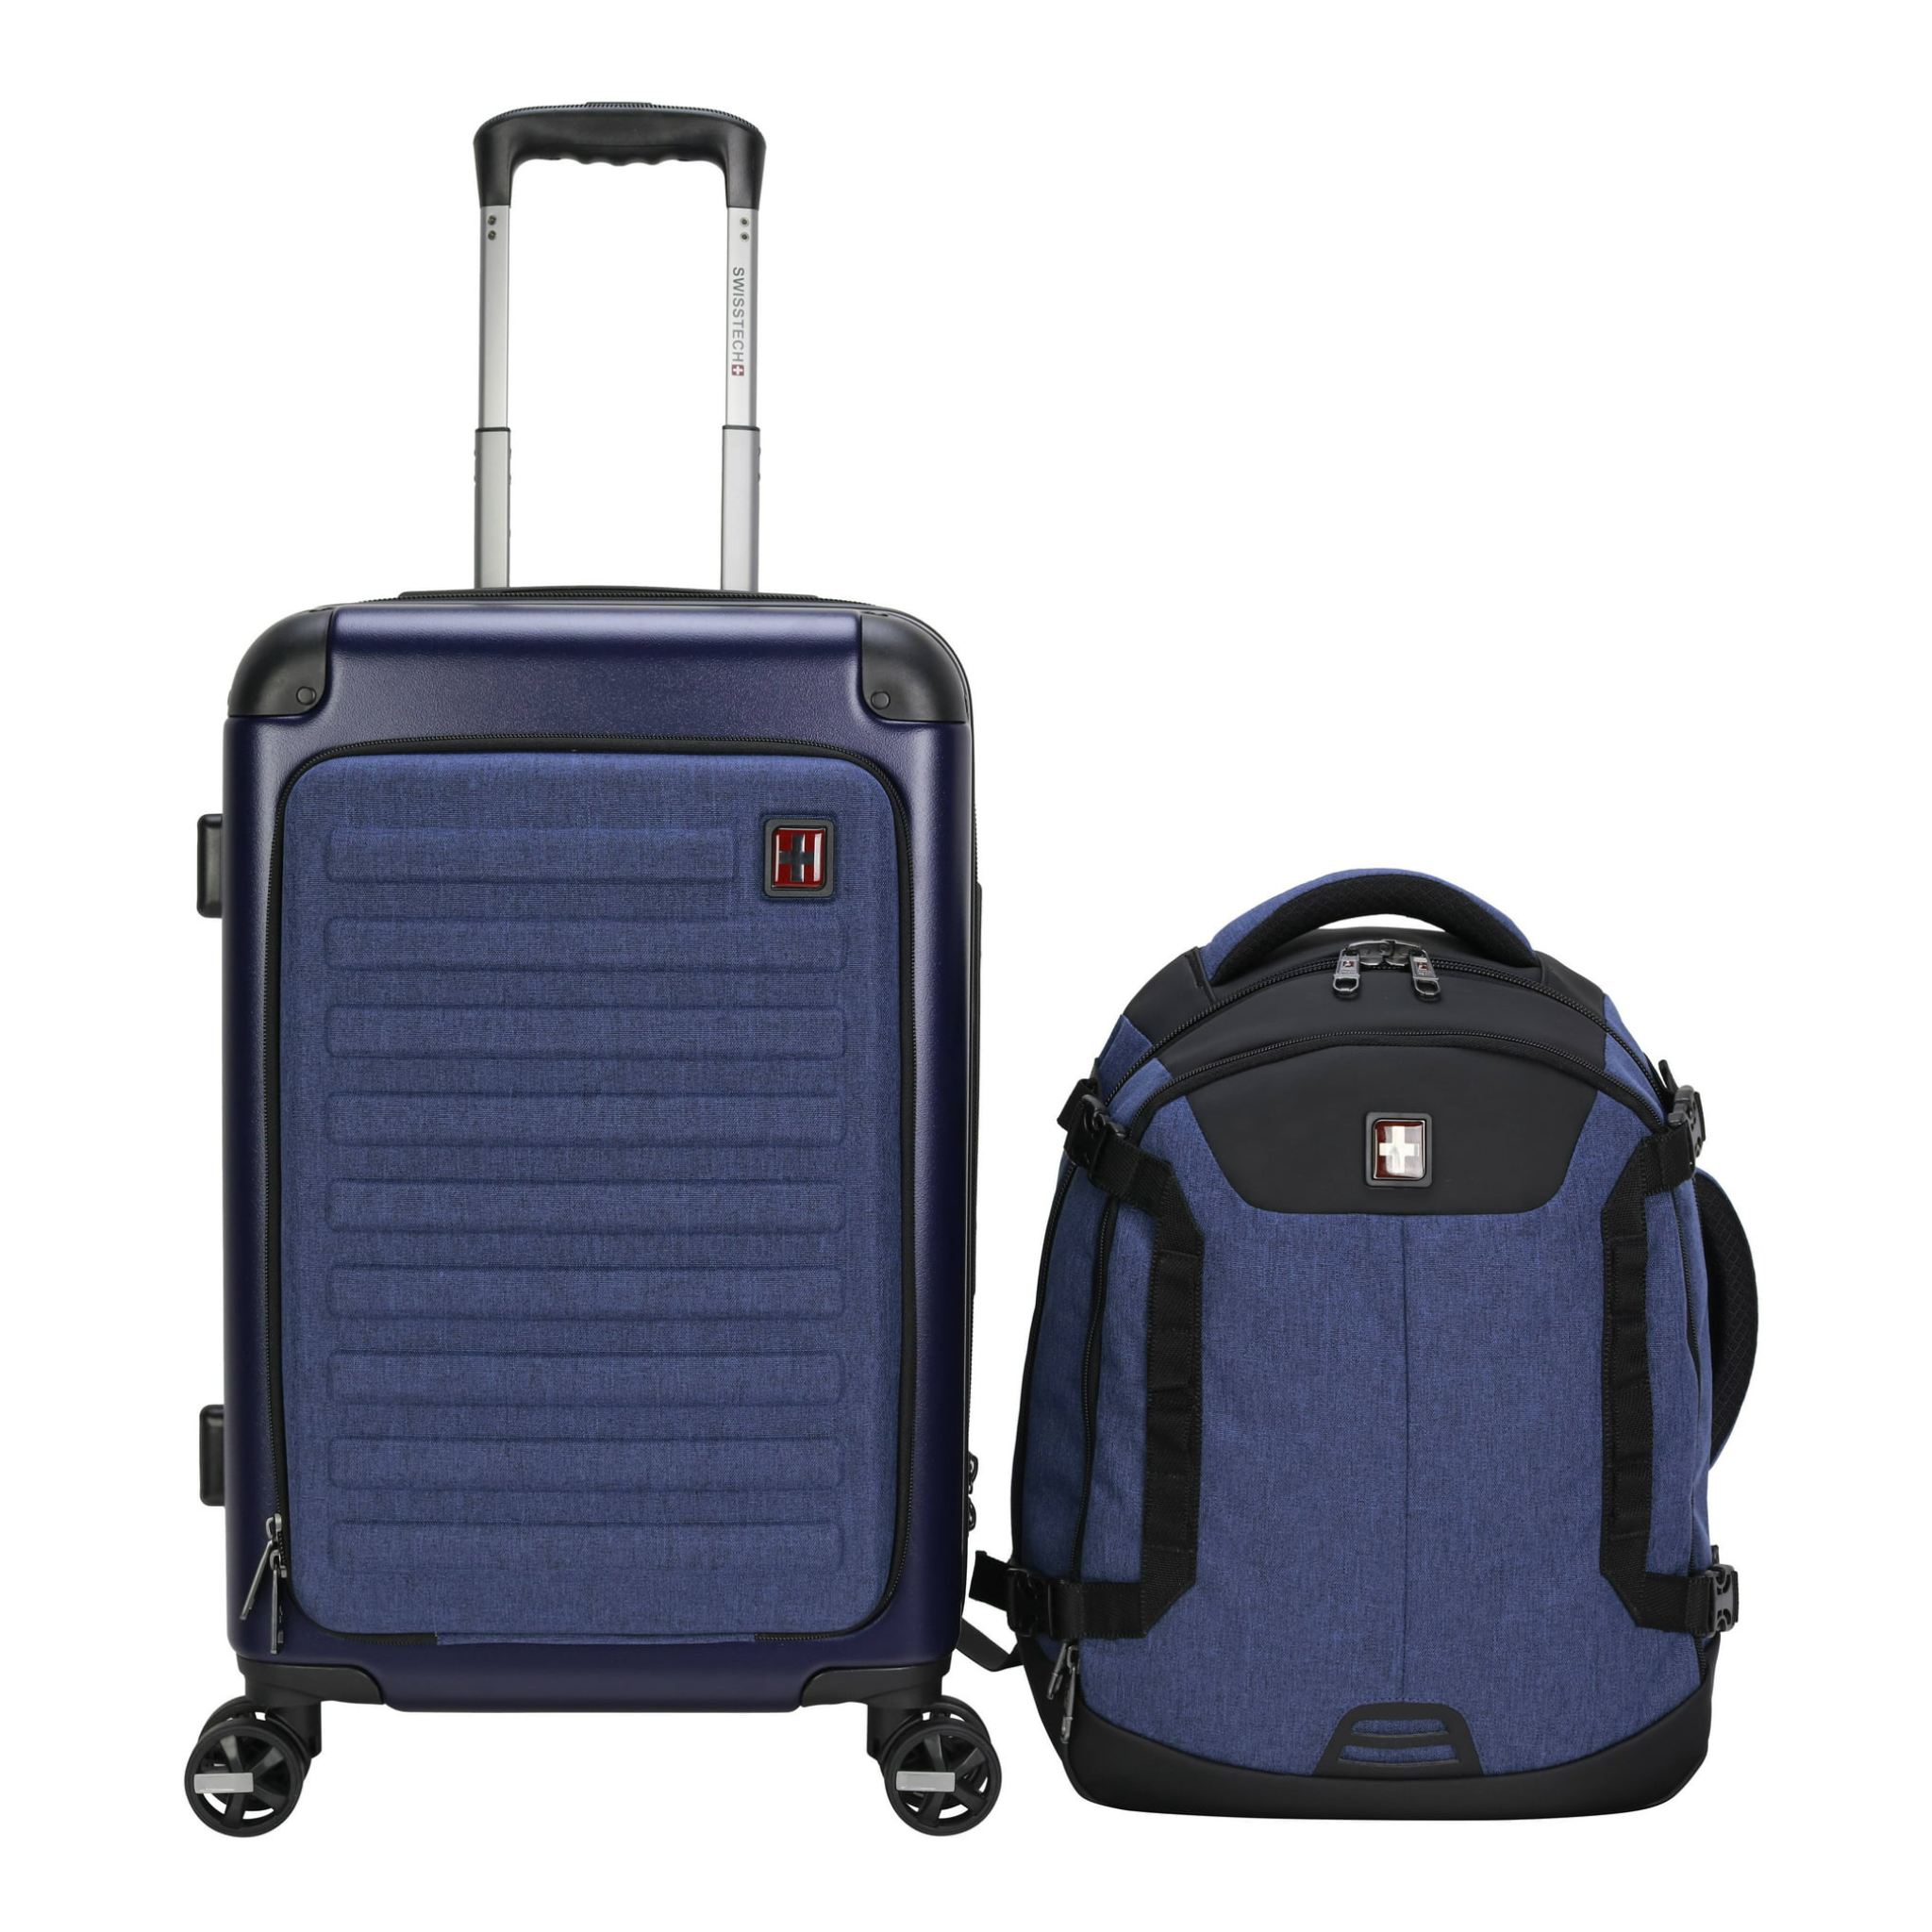 Swiss Tech 2-Pc Hybrid Luggage with Travel Backpack